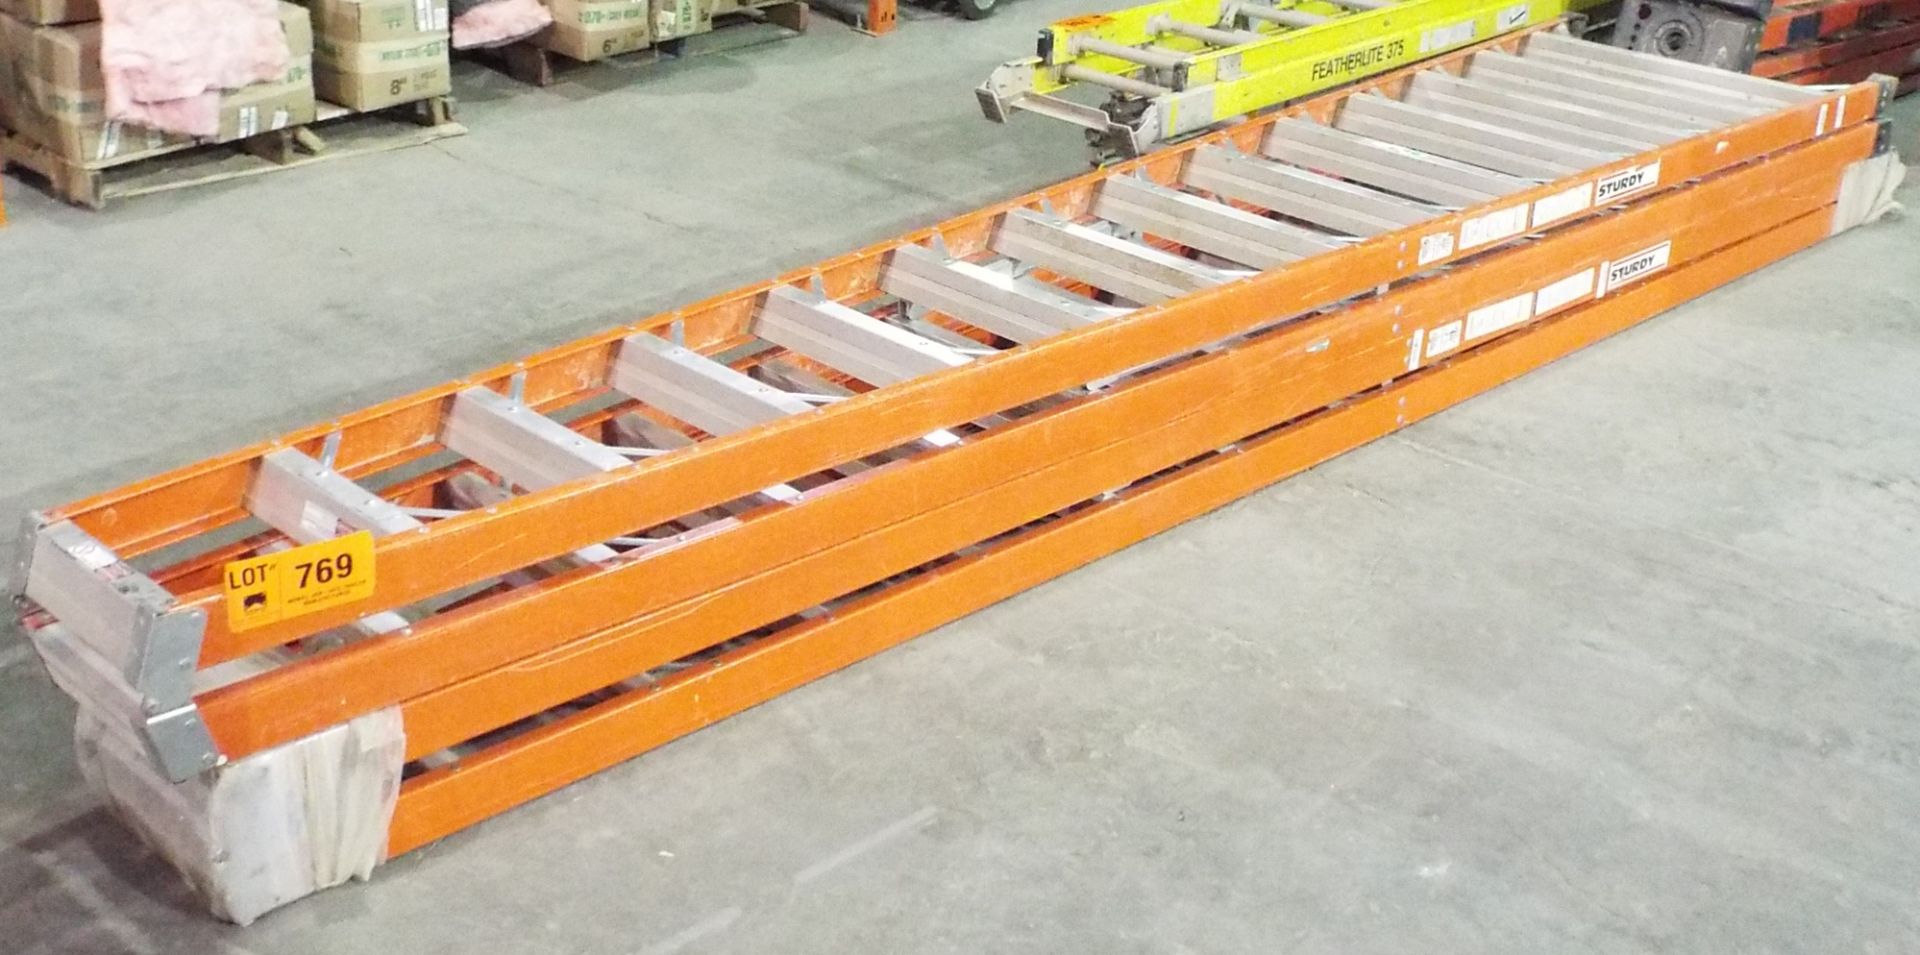 LOT/ A FRAME LADDERS